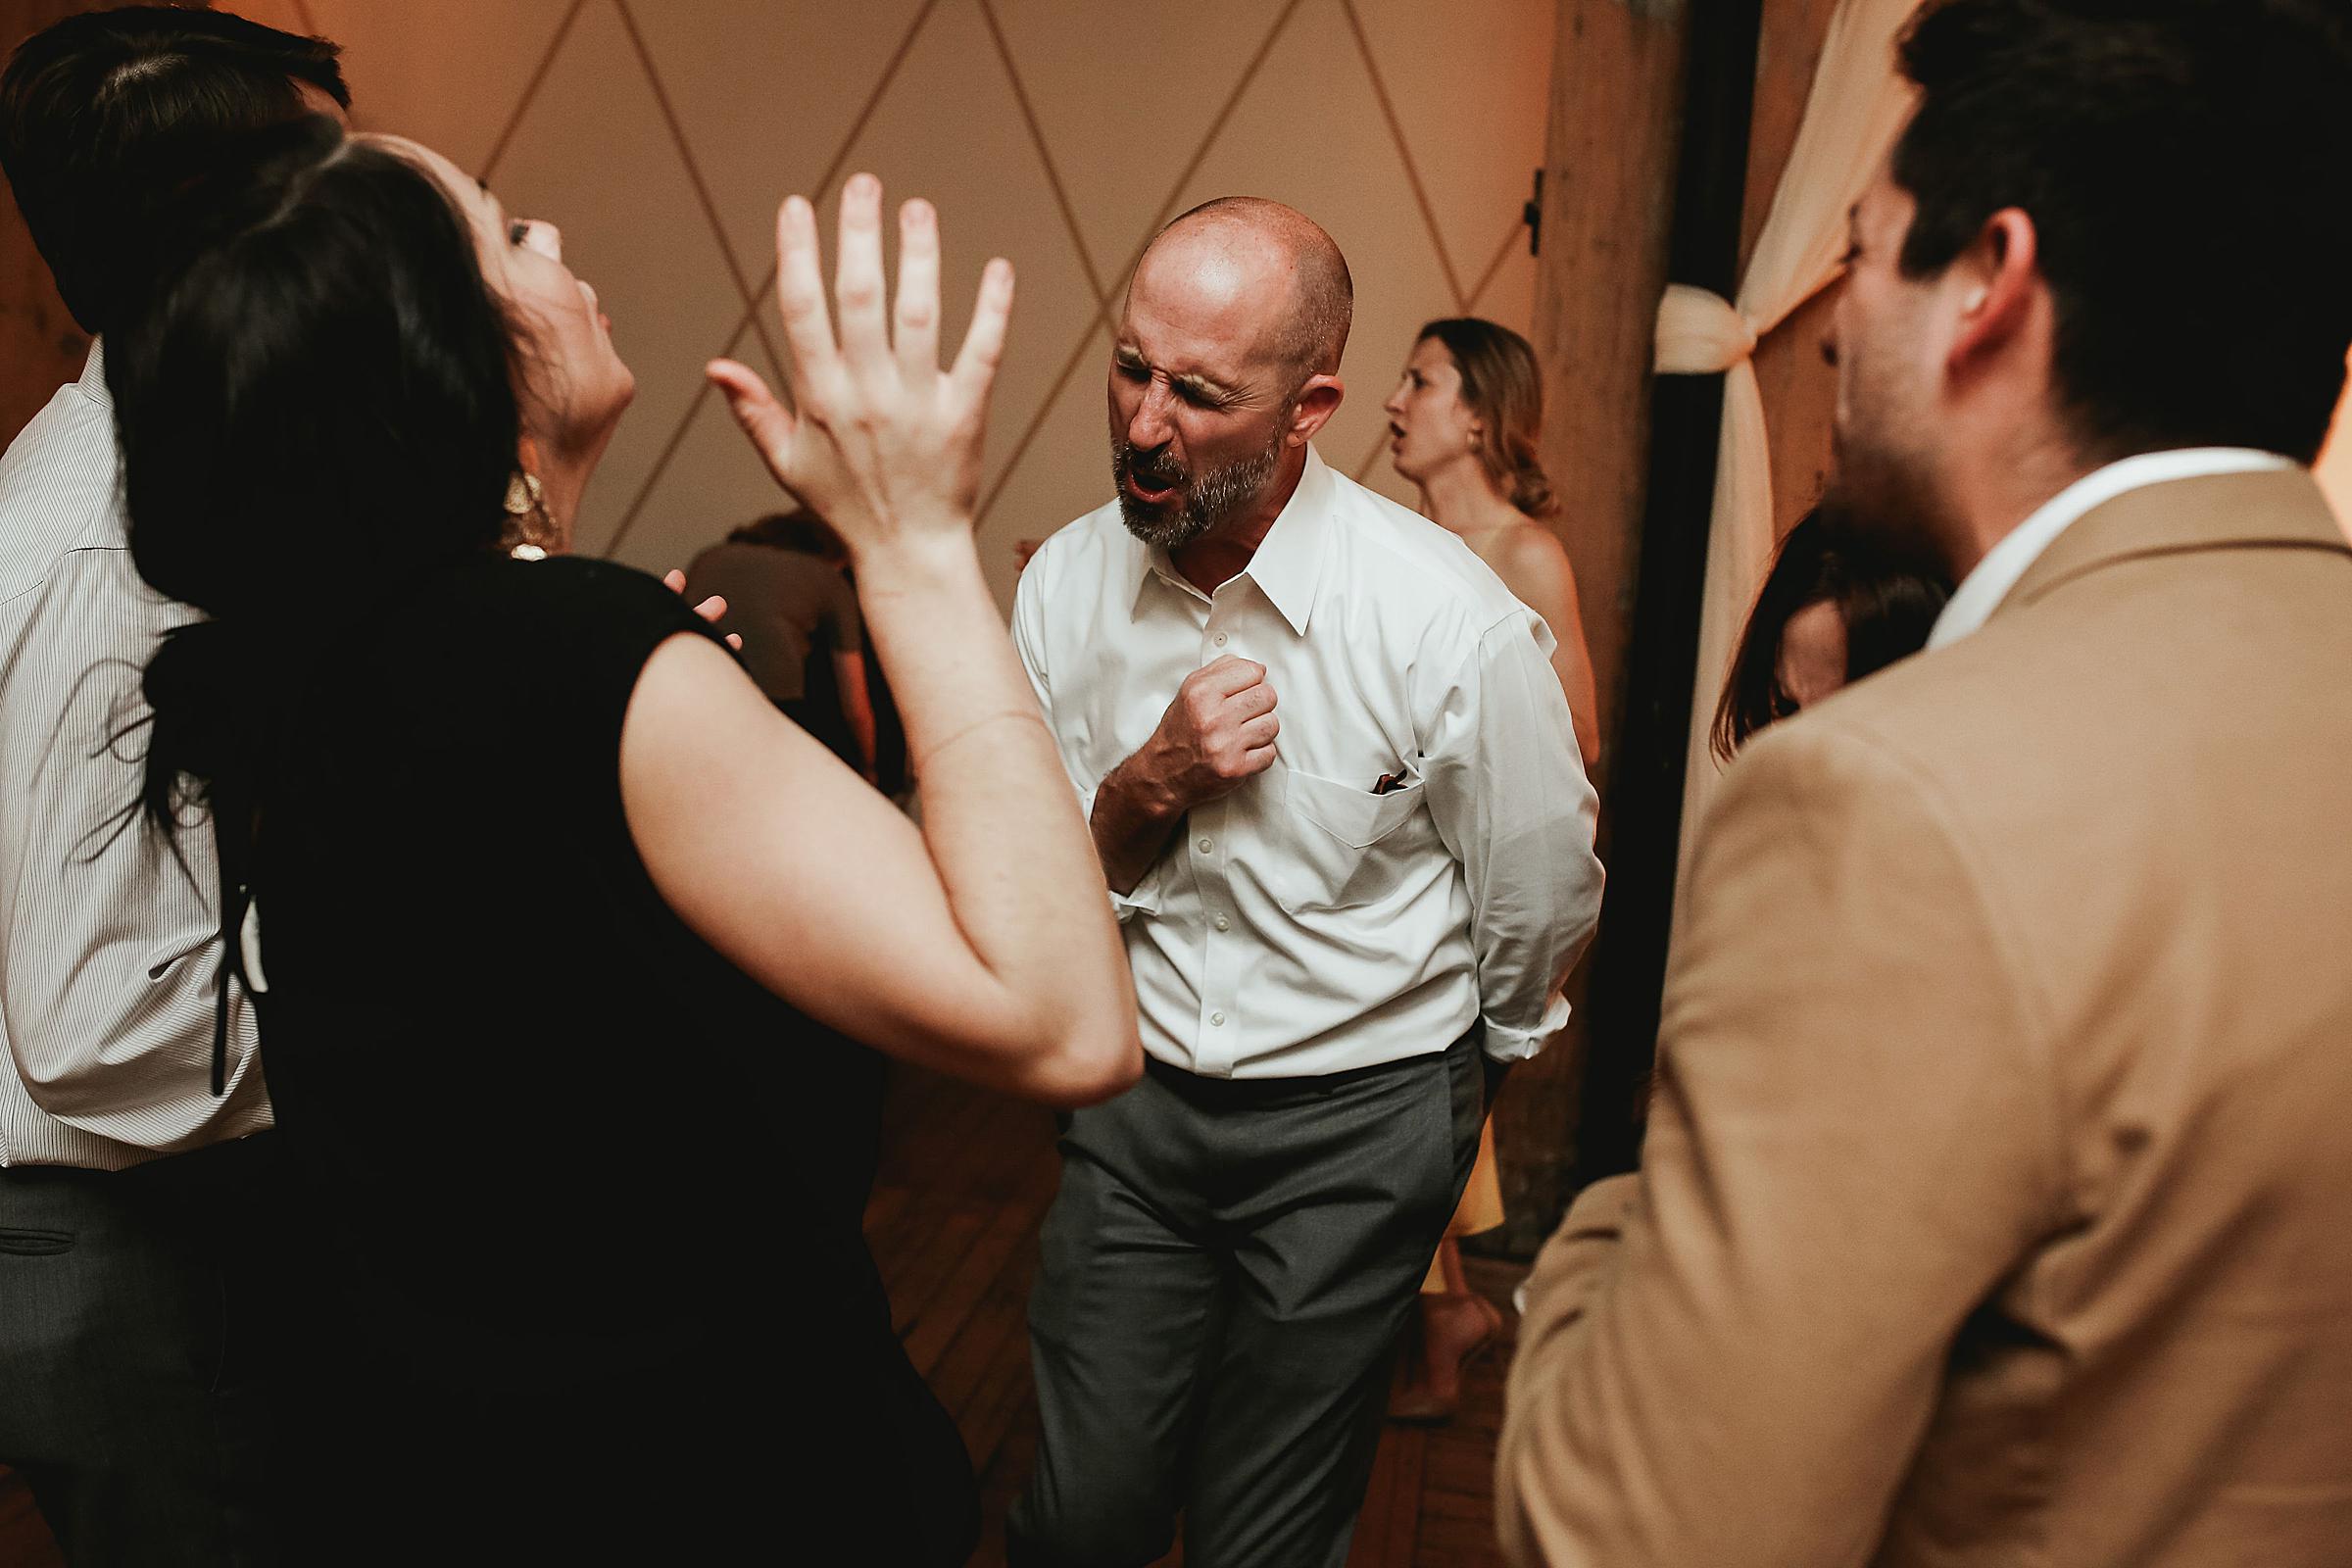 Omaha Wedding; Reception at Vintage Ballroom in the Old Market; Photographed by Juliana Montane Photography